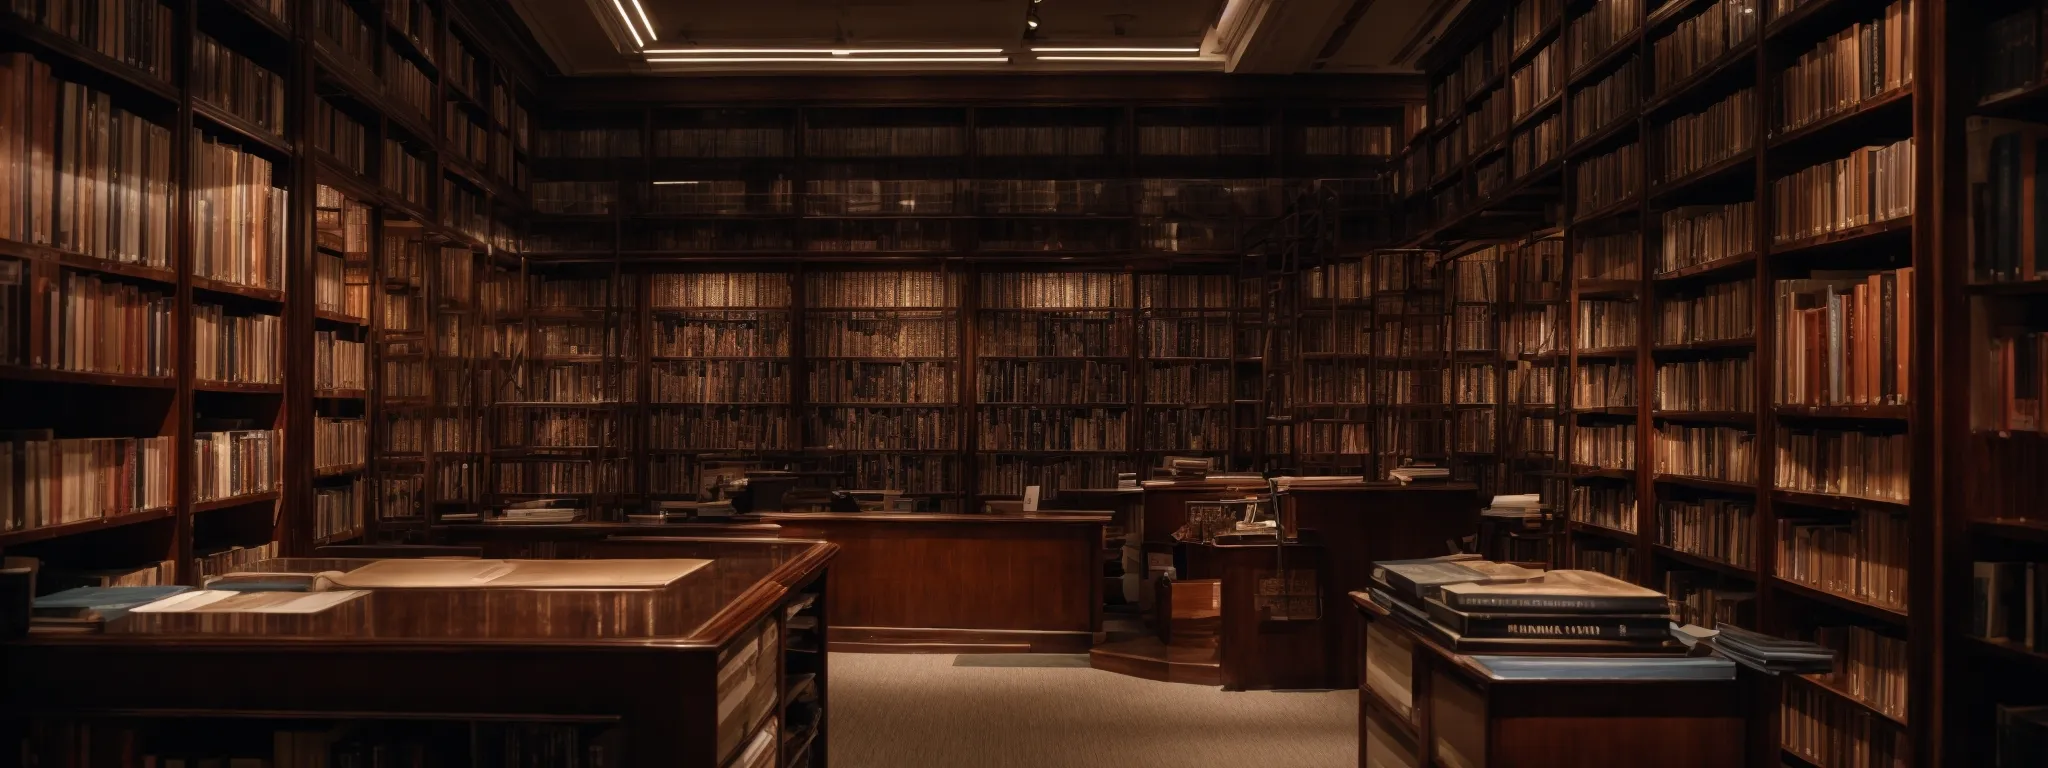 a library with books organized on shelves, symbolizing the structured yet limited reservoir of seo content knowledge.